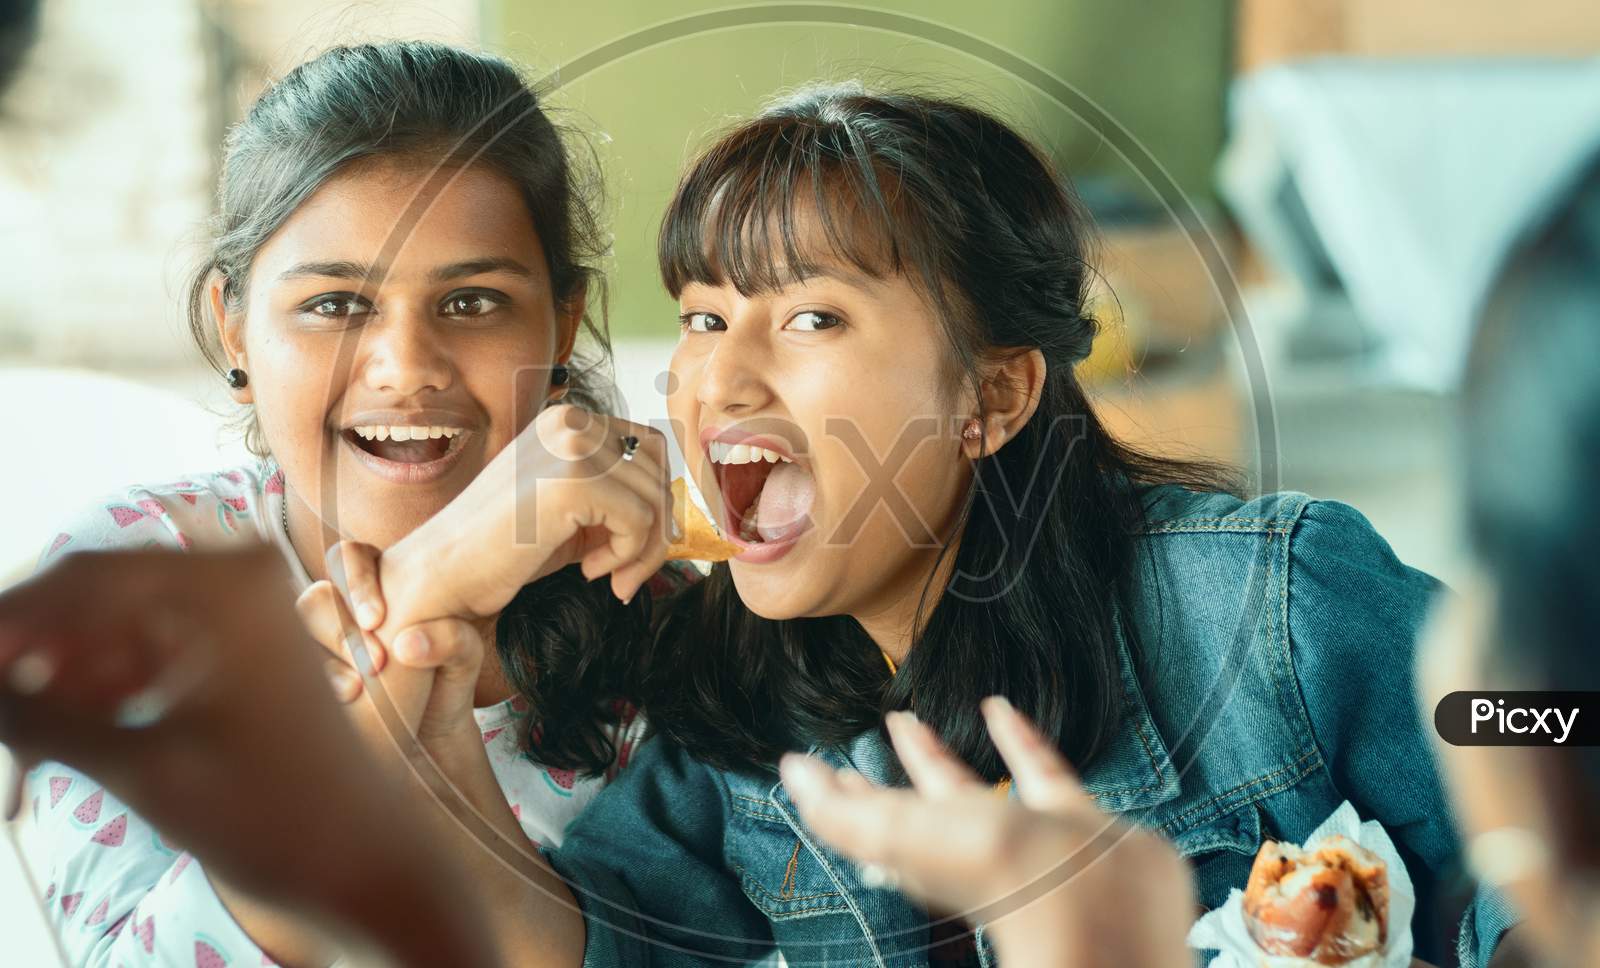 Teenager Trying To Take Or Grab Food From Friend - Young Girl Playfully Fighting For Snacks With Her Friend - Concept Of Friends Having Fun While Having Food At College Restaurant.